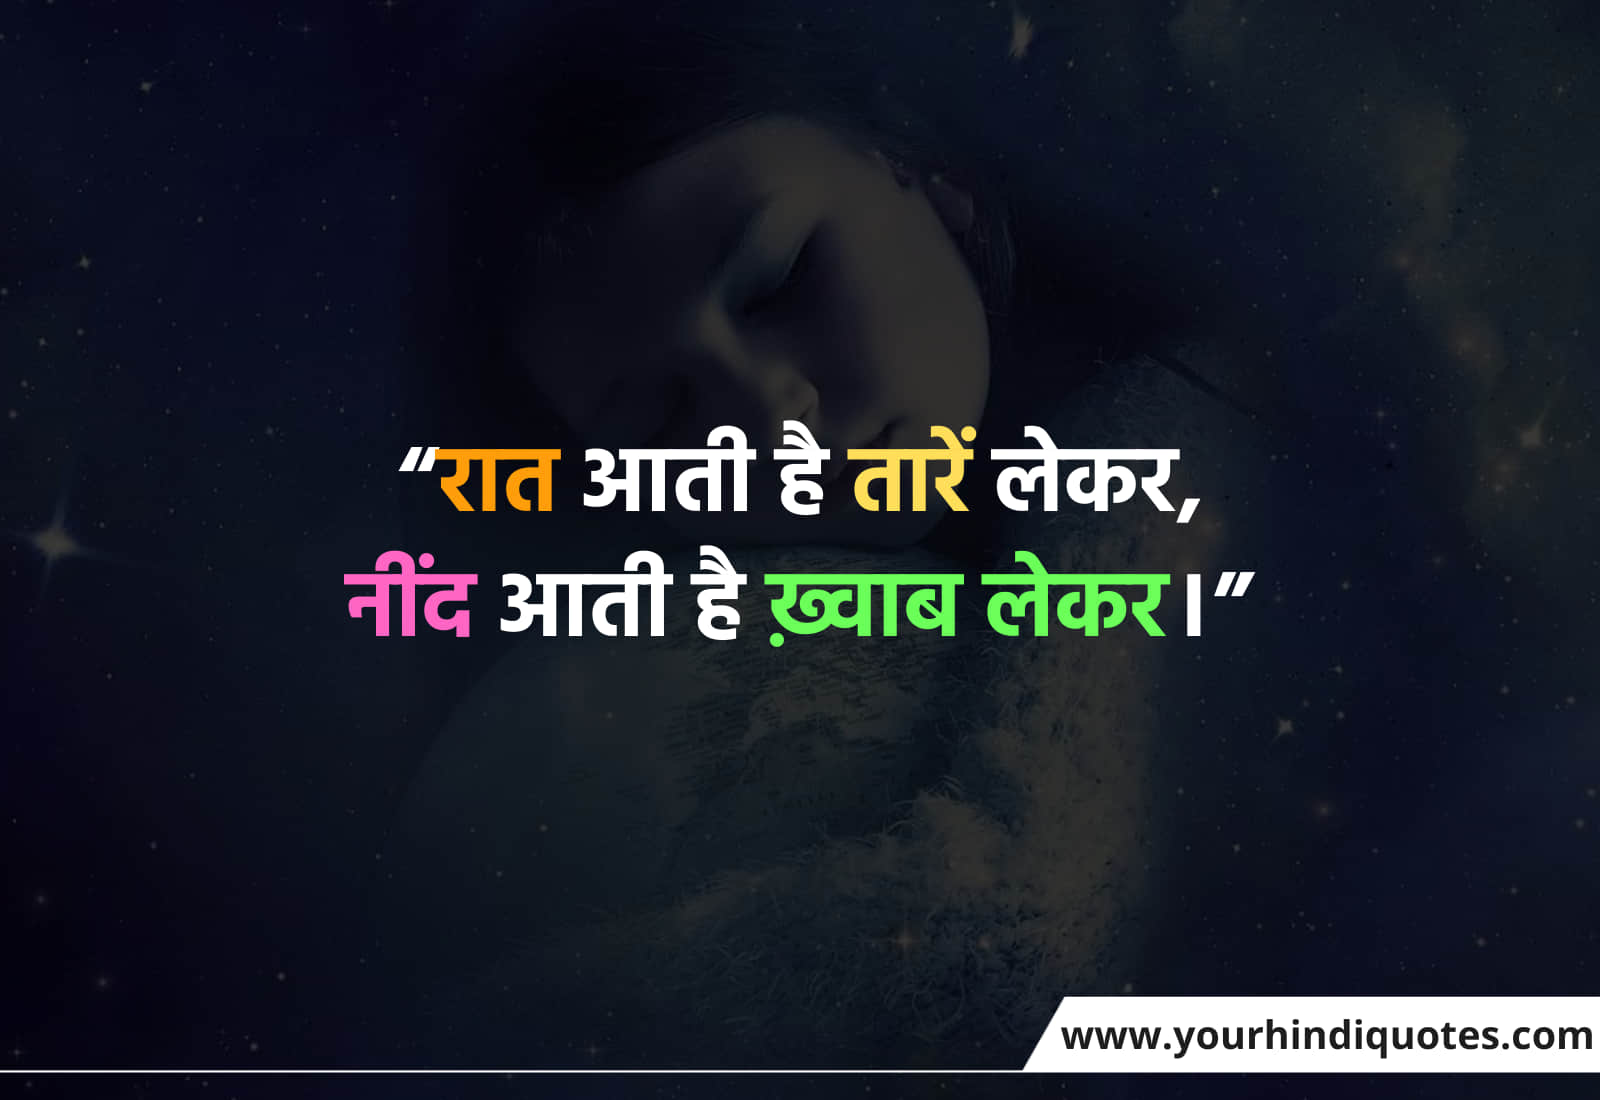 Best Good Night Quotes In Hindi